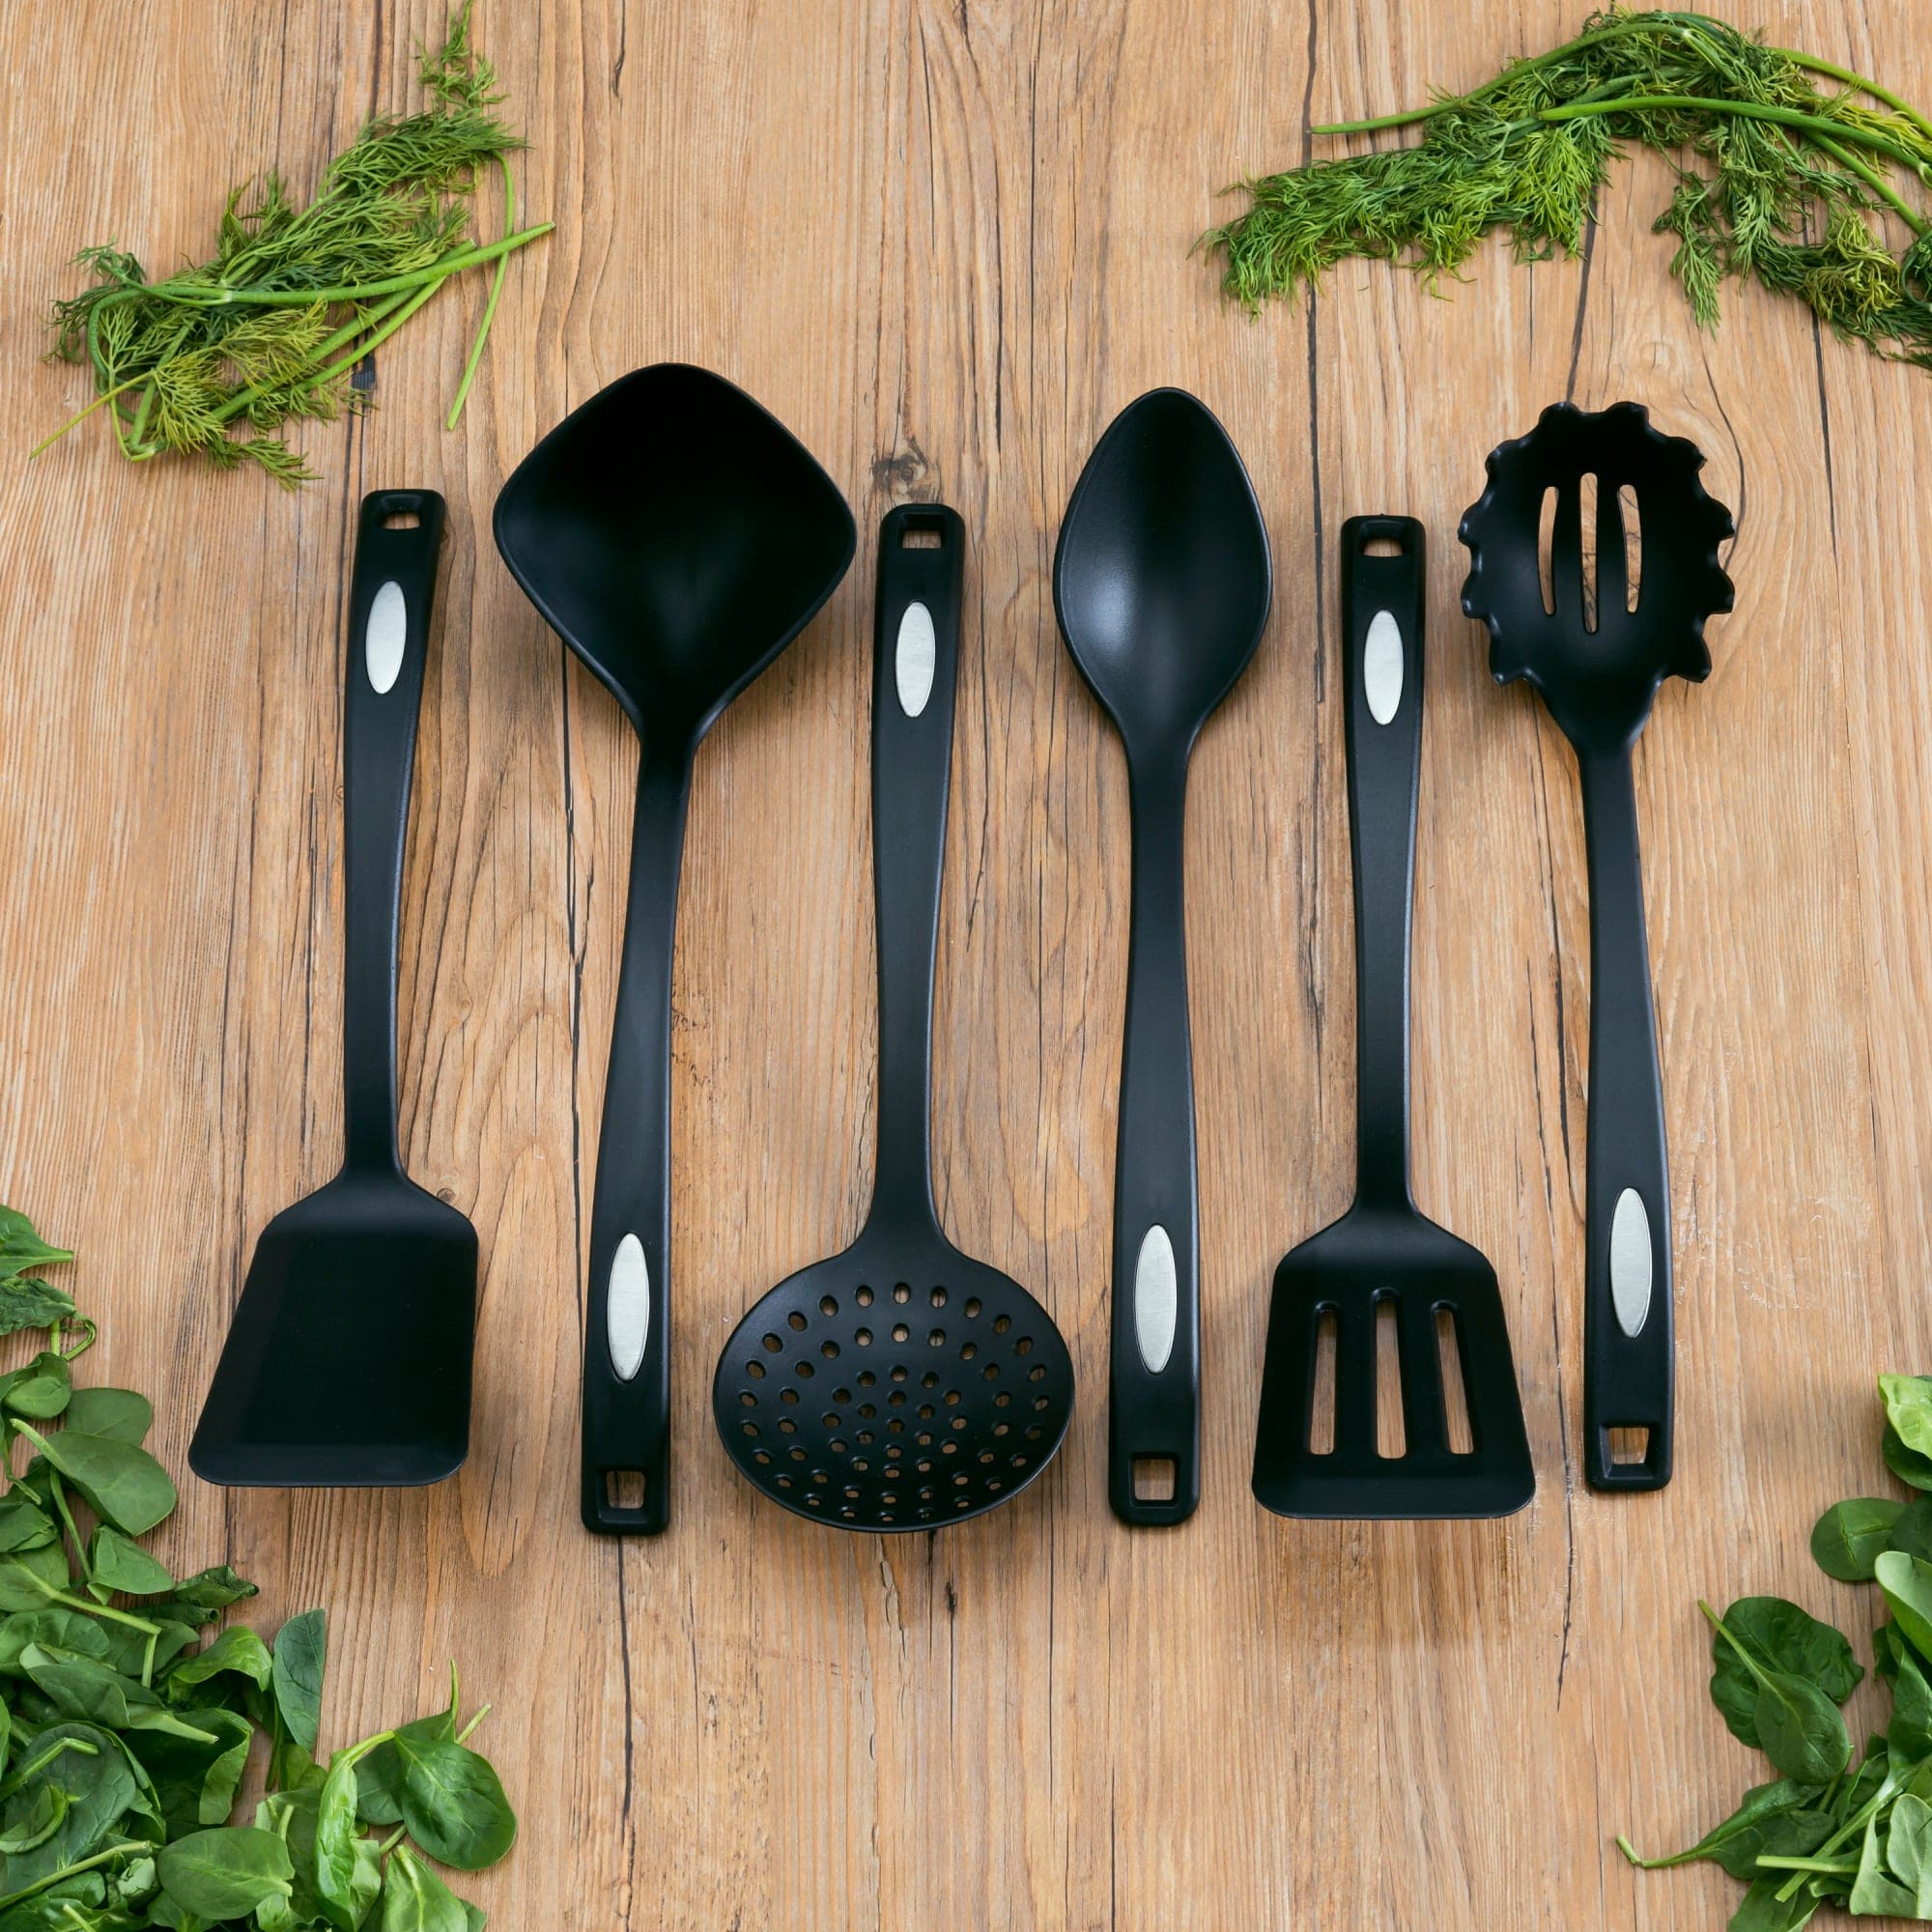 Home Basics 6 Piece Nylon Serving Utensils with Curved Handles, Black $4 EACH, CASE PACK OF 24